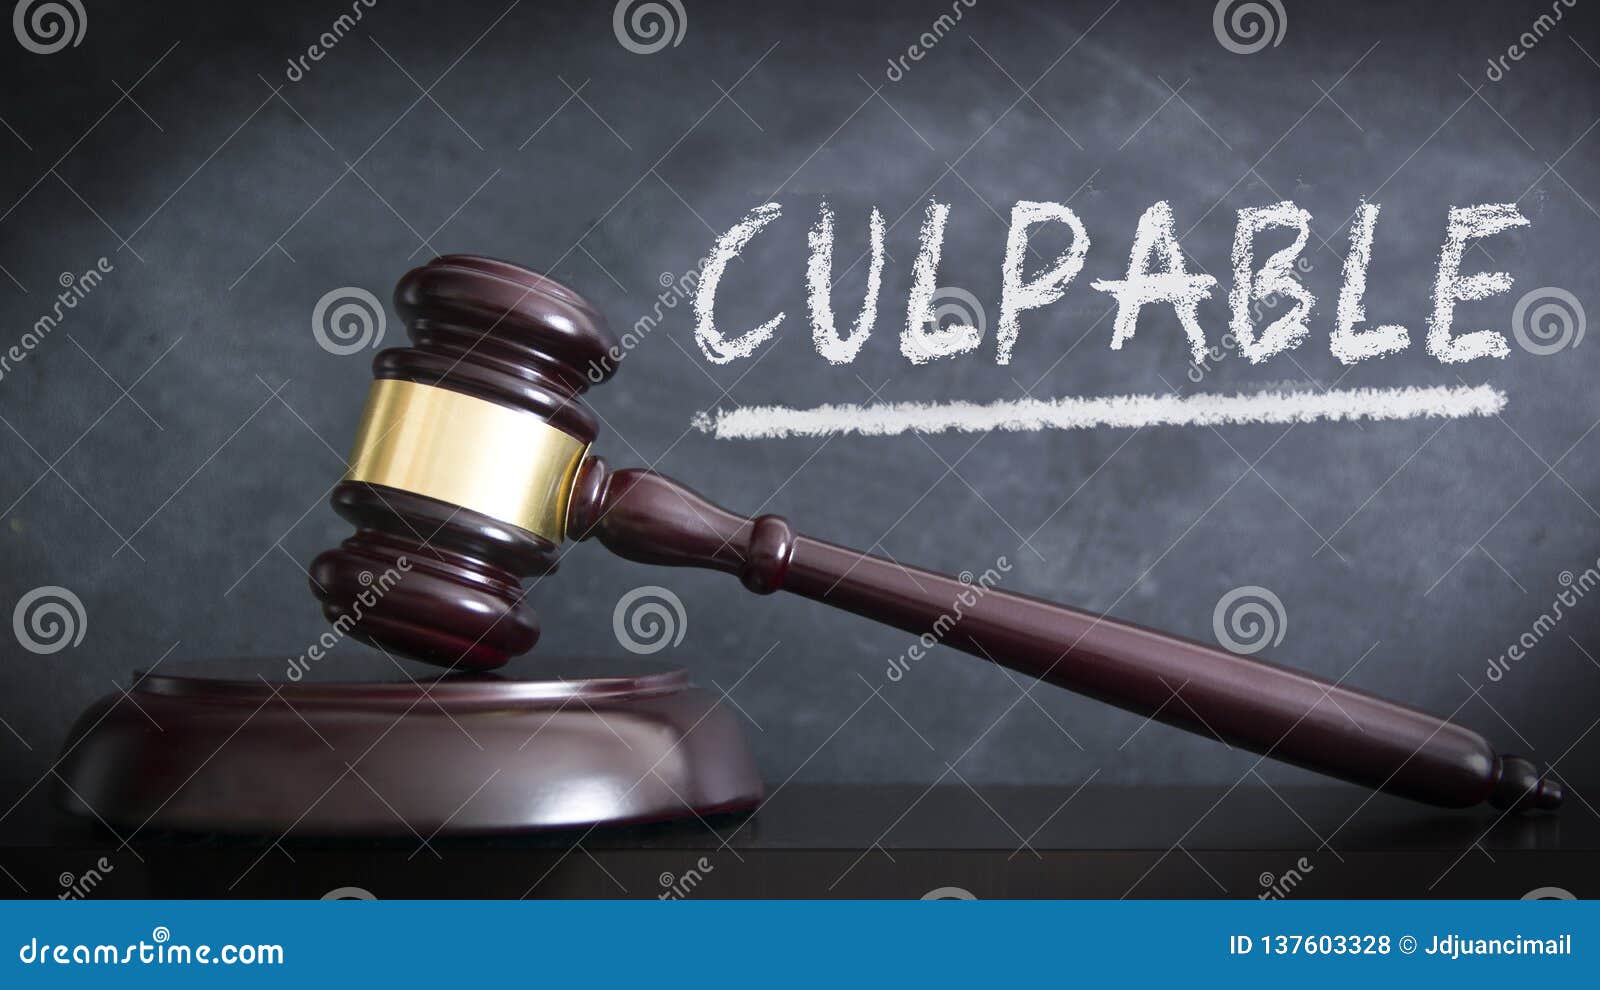 wooden hammer in a courthouse at verdict of guilty in spanish `culpable` in a judgement. hand written concept